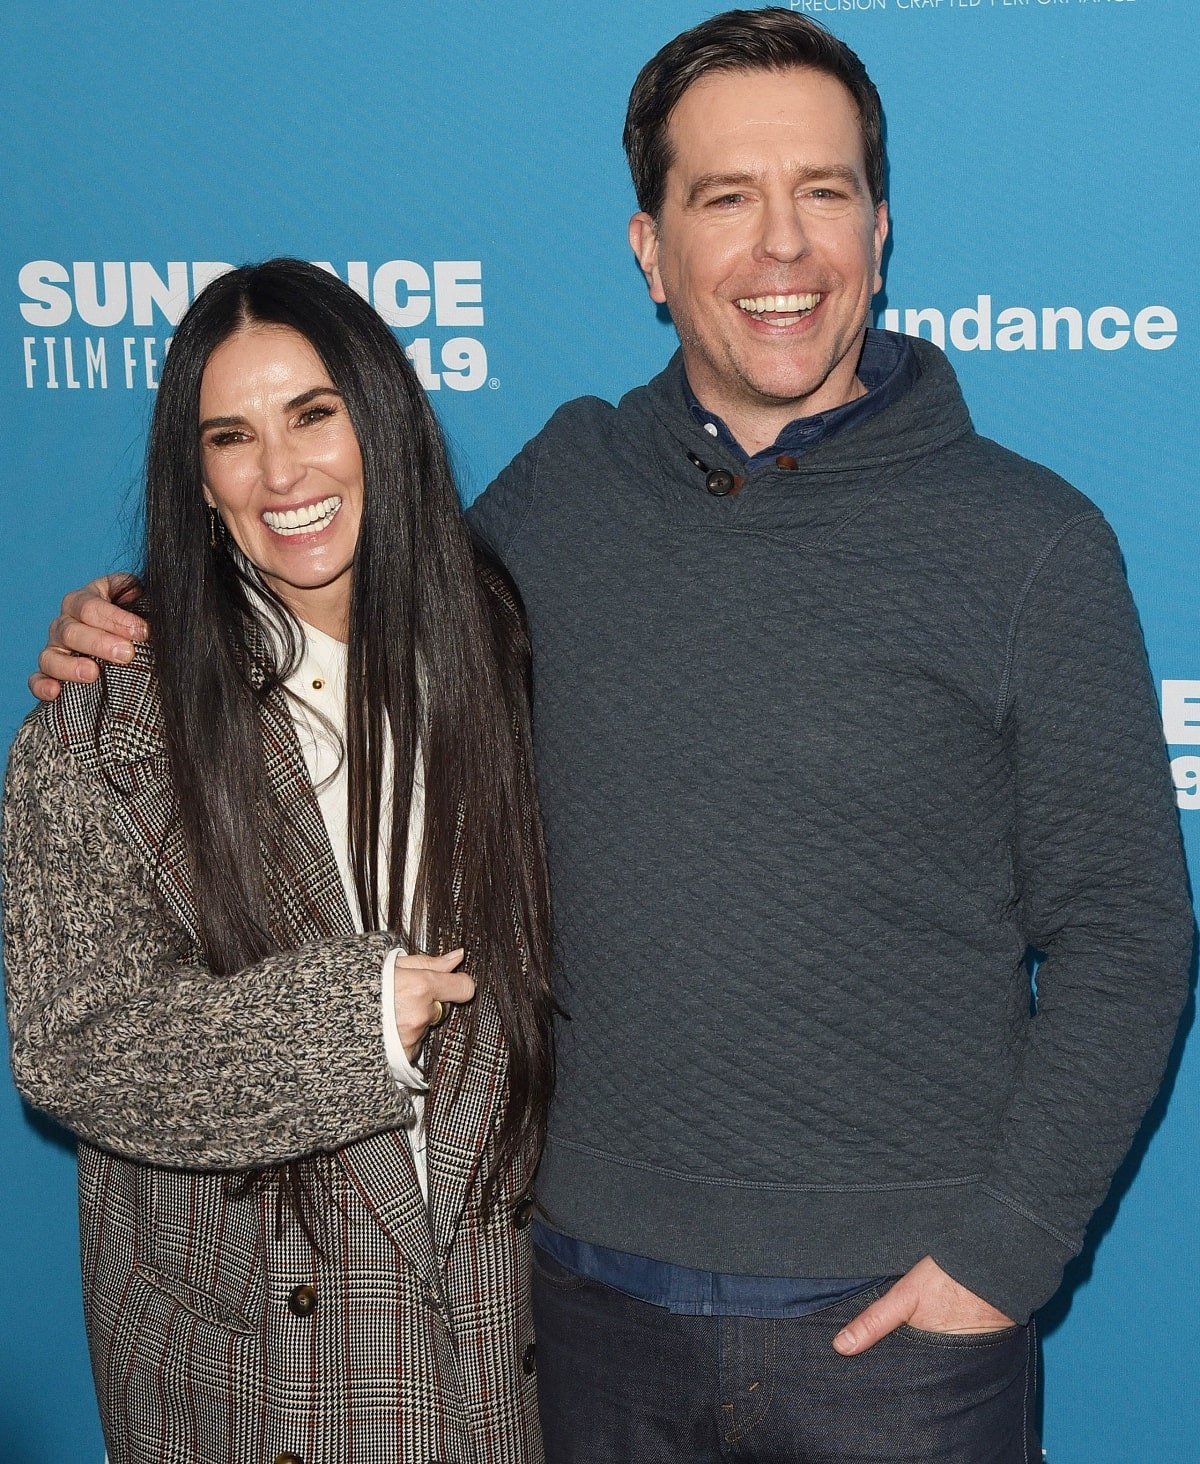 Demi Moore and Ed Helms at the premiere of Corporate Animals during the 2019 Sundance Film Festival